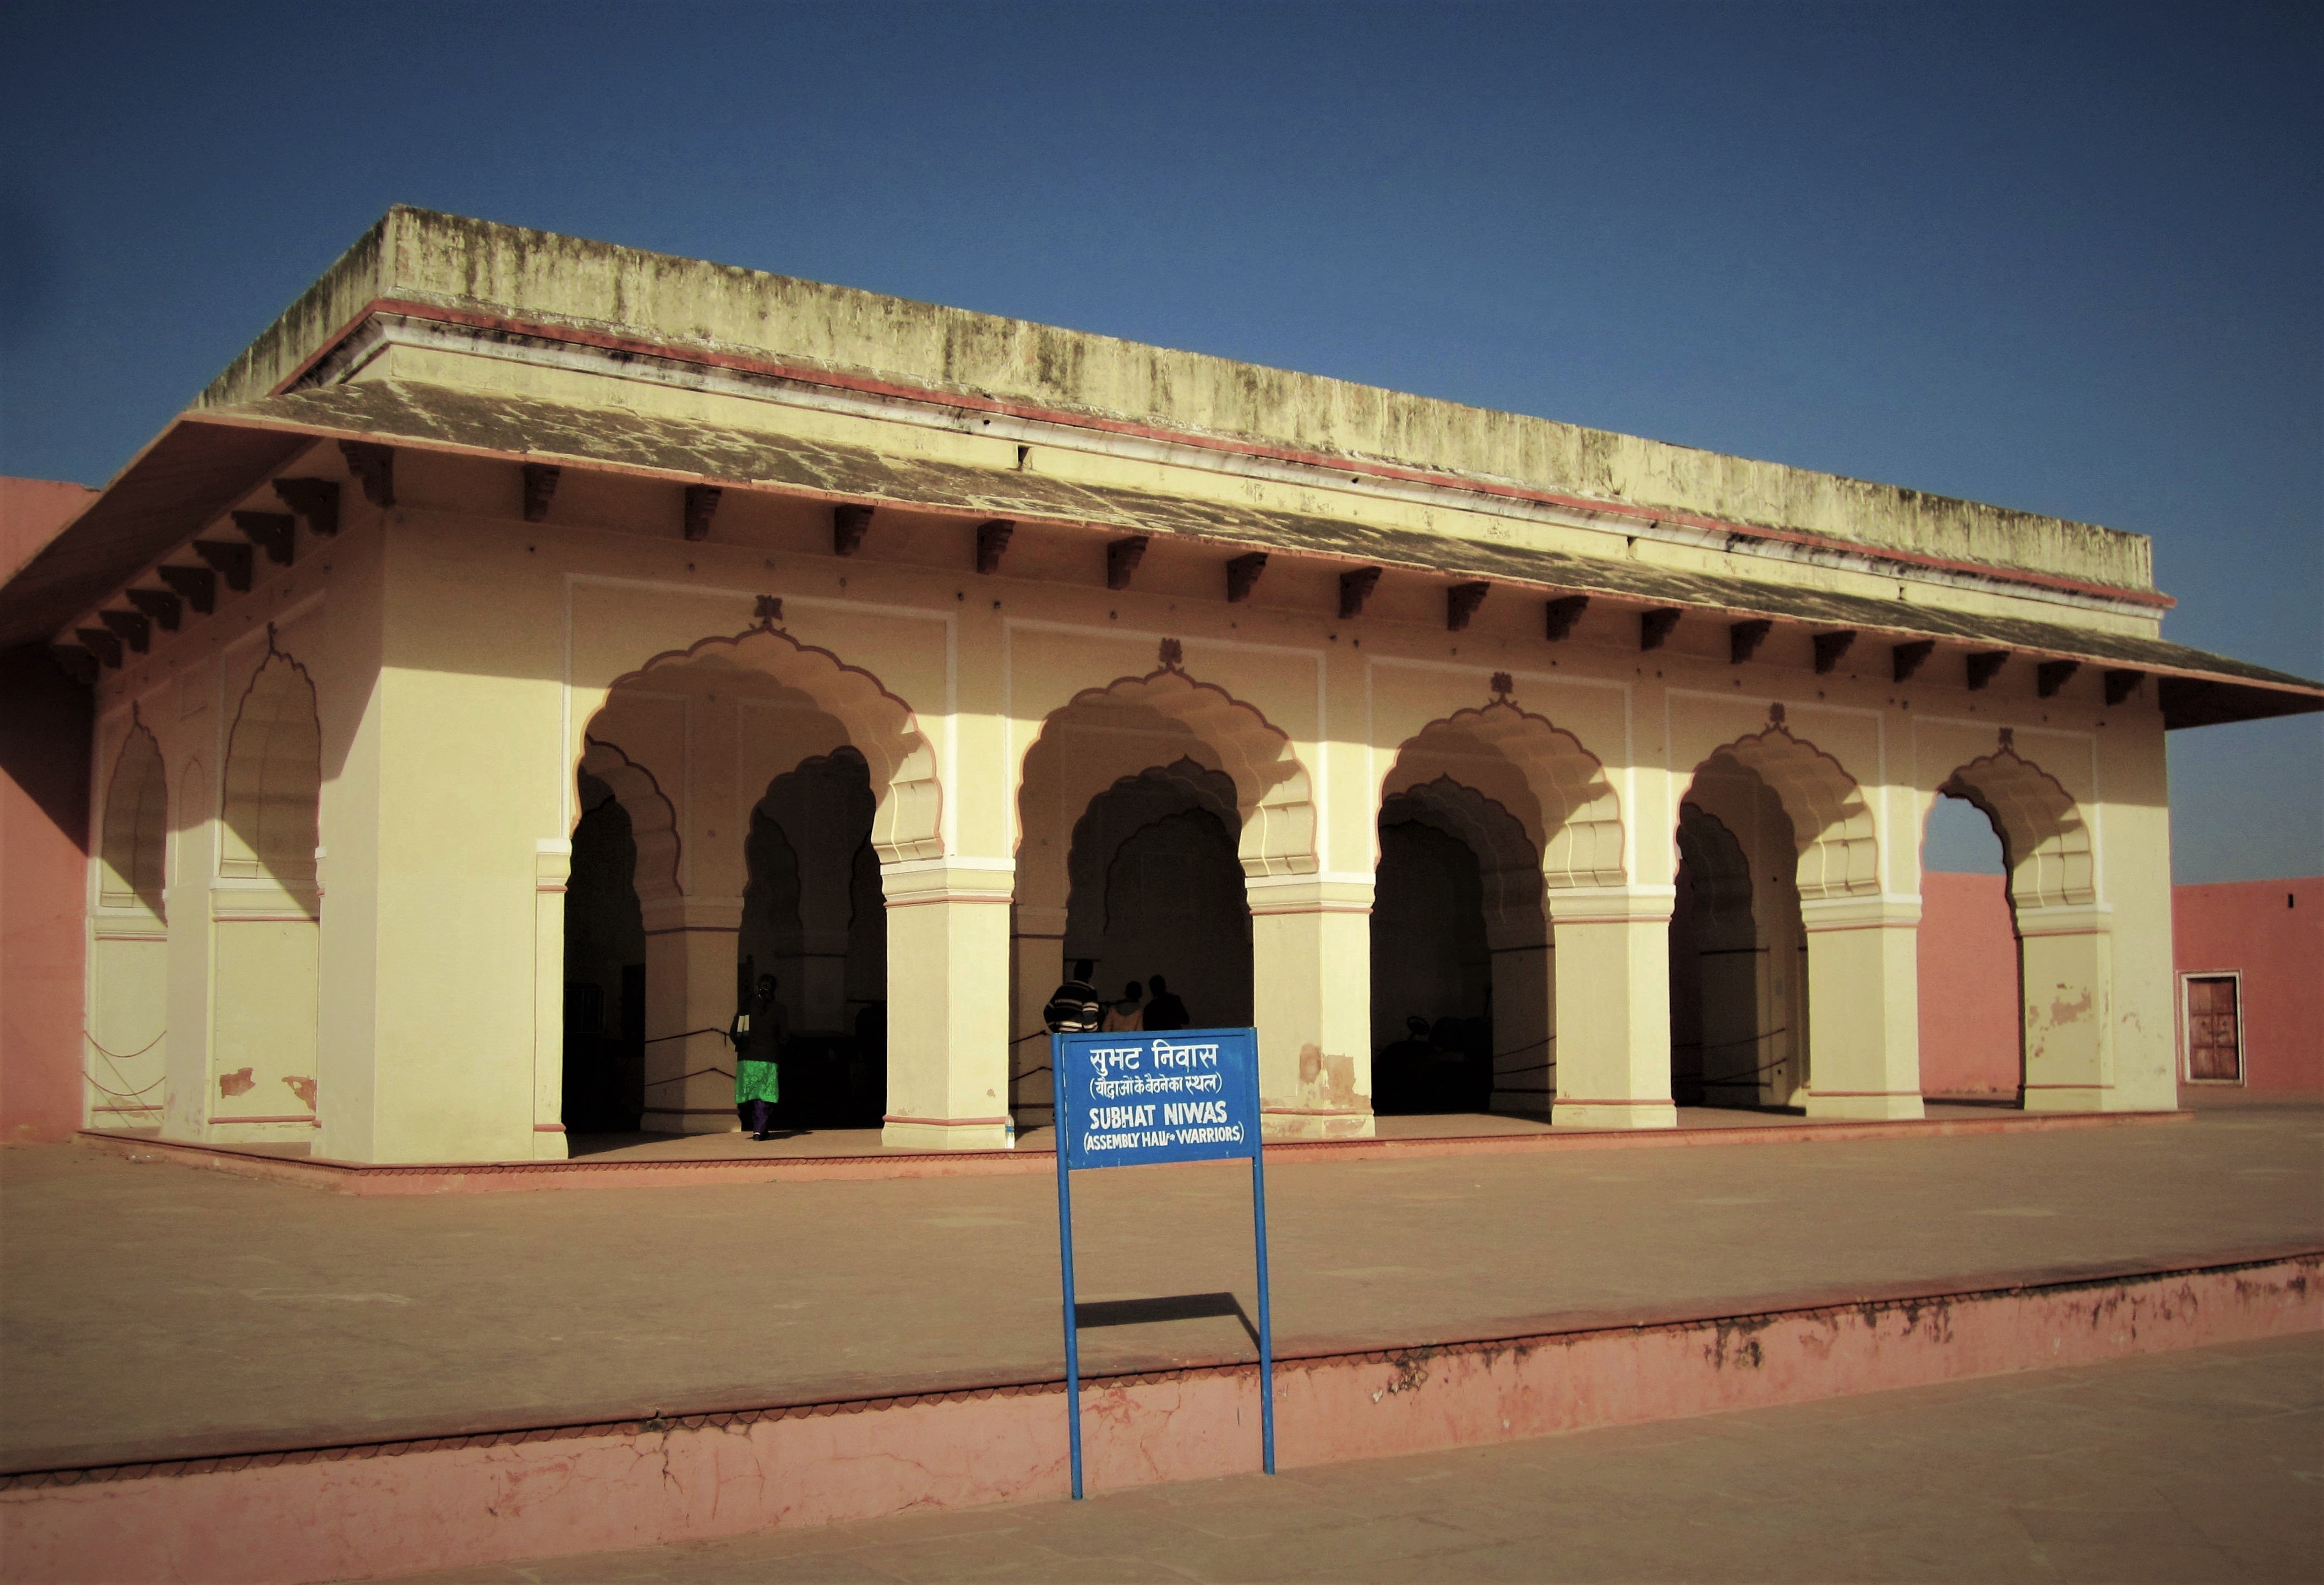 Few Structures Inside the Jaigarh Fort